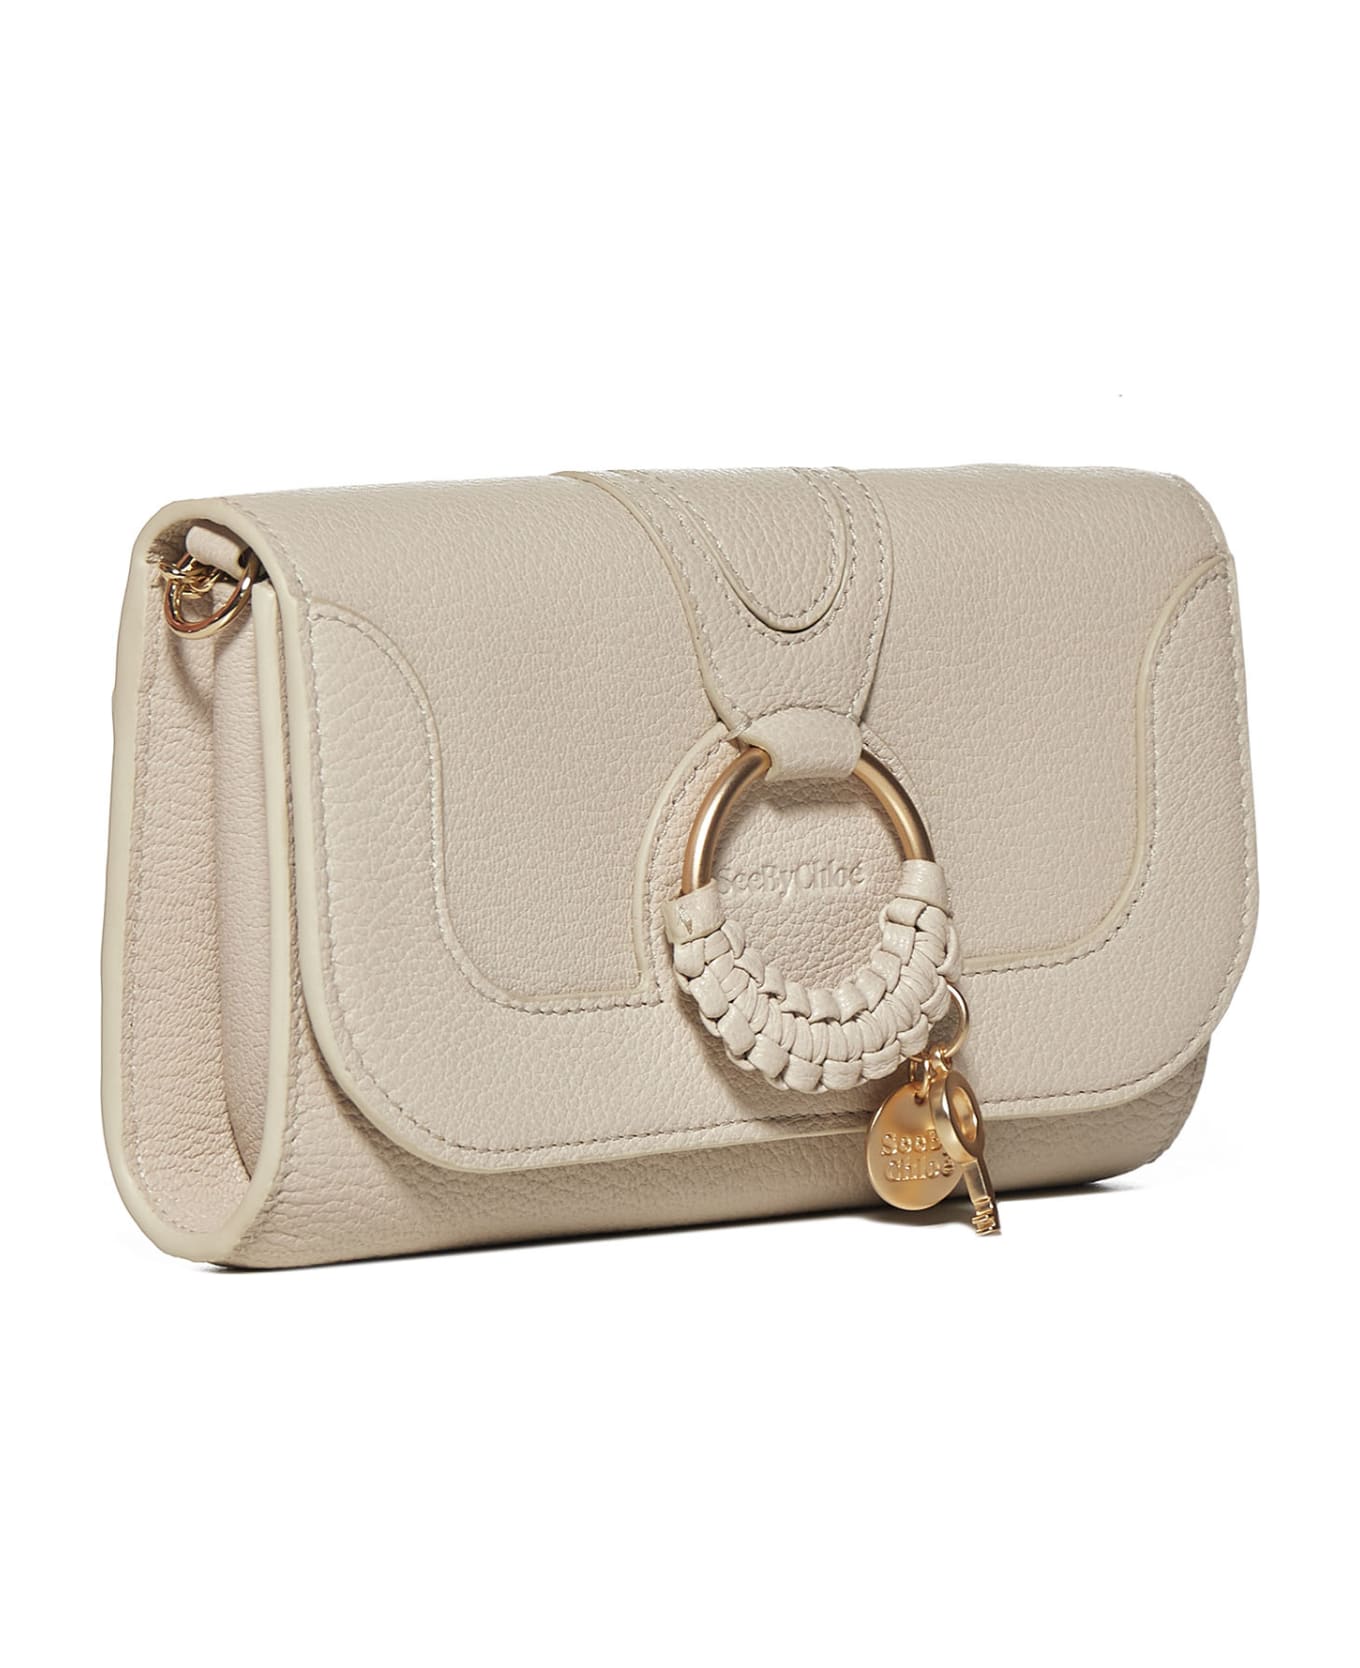 See by Chloé Shoulder Bag - Cement beige ショルダーバッグ